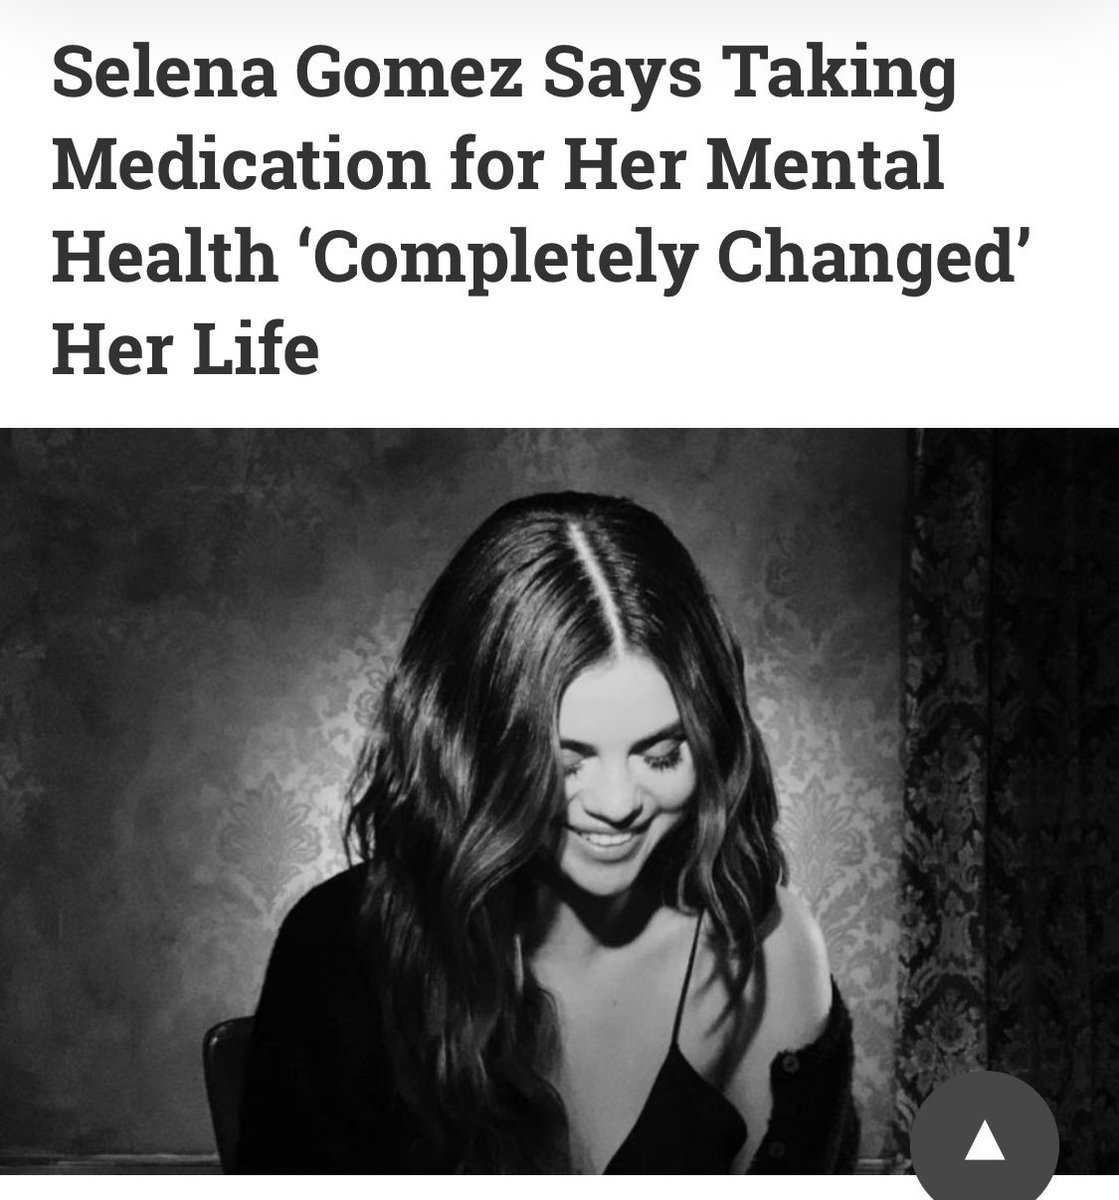 When having mental health issues, meds are commonly prescribed when seeking treatment. Selena has claimed to be on meds and to no surprise, this too comes with side effects. This can help explain any balance coordination issues, speech issues, and memory problems.